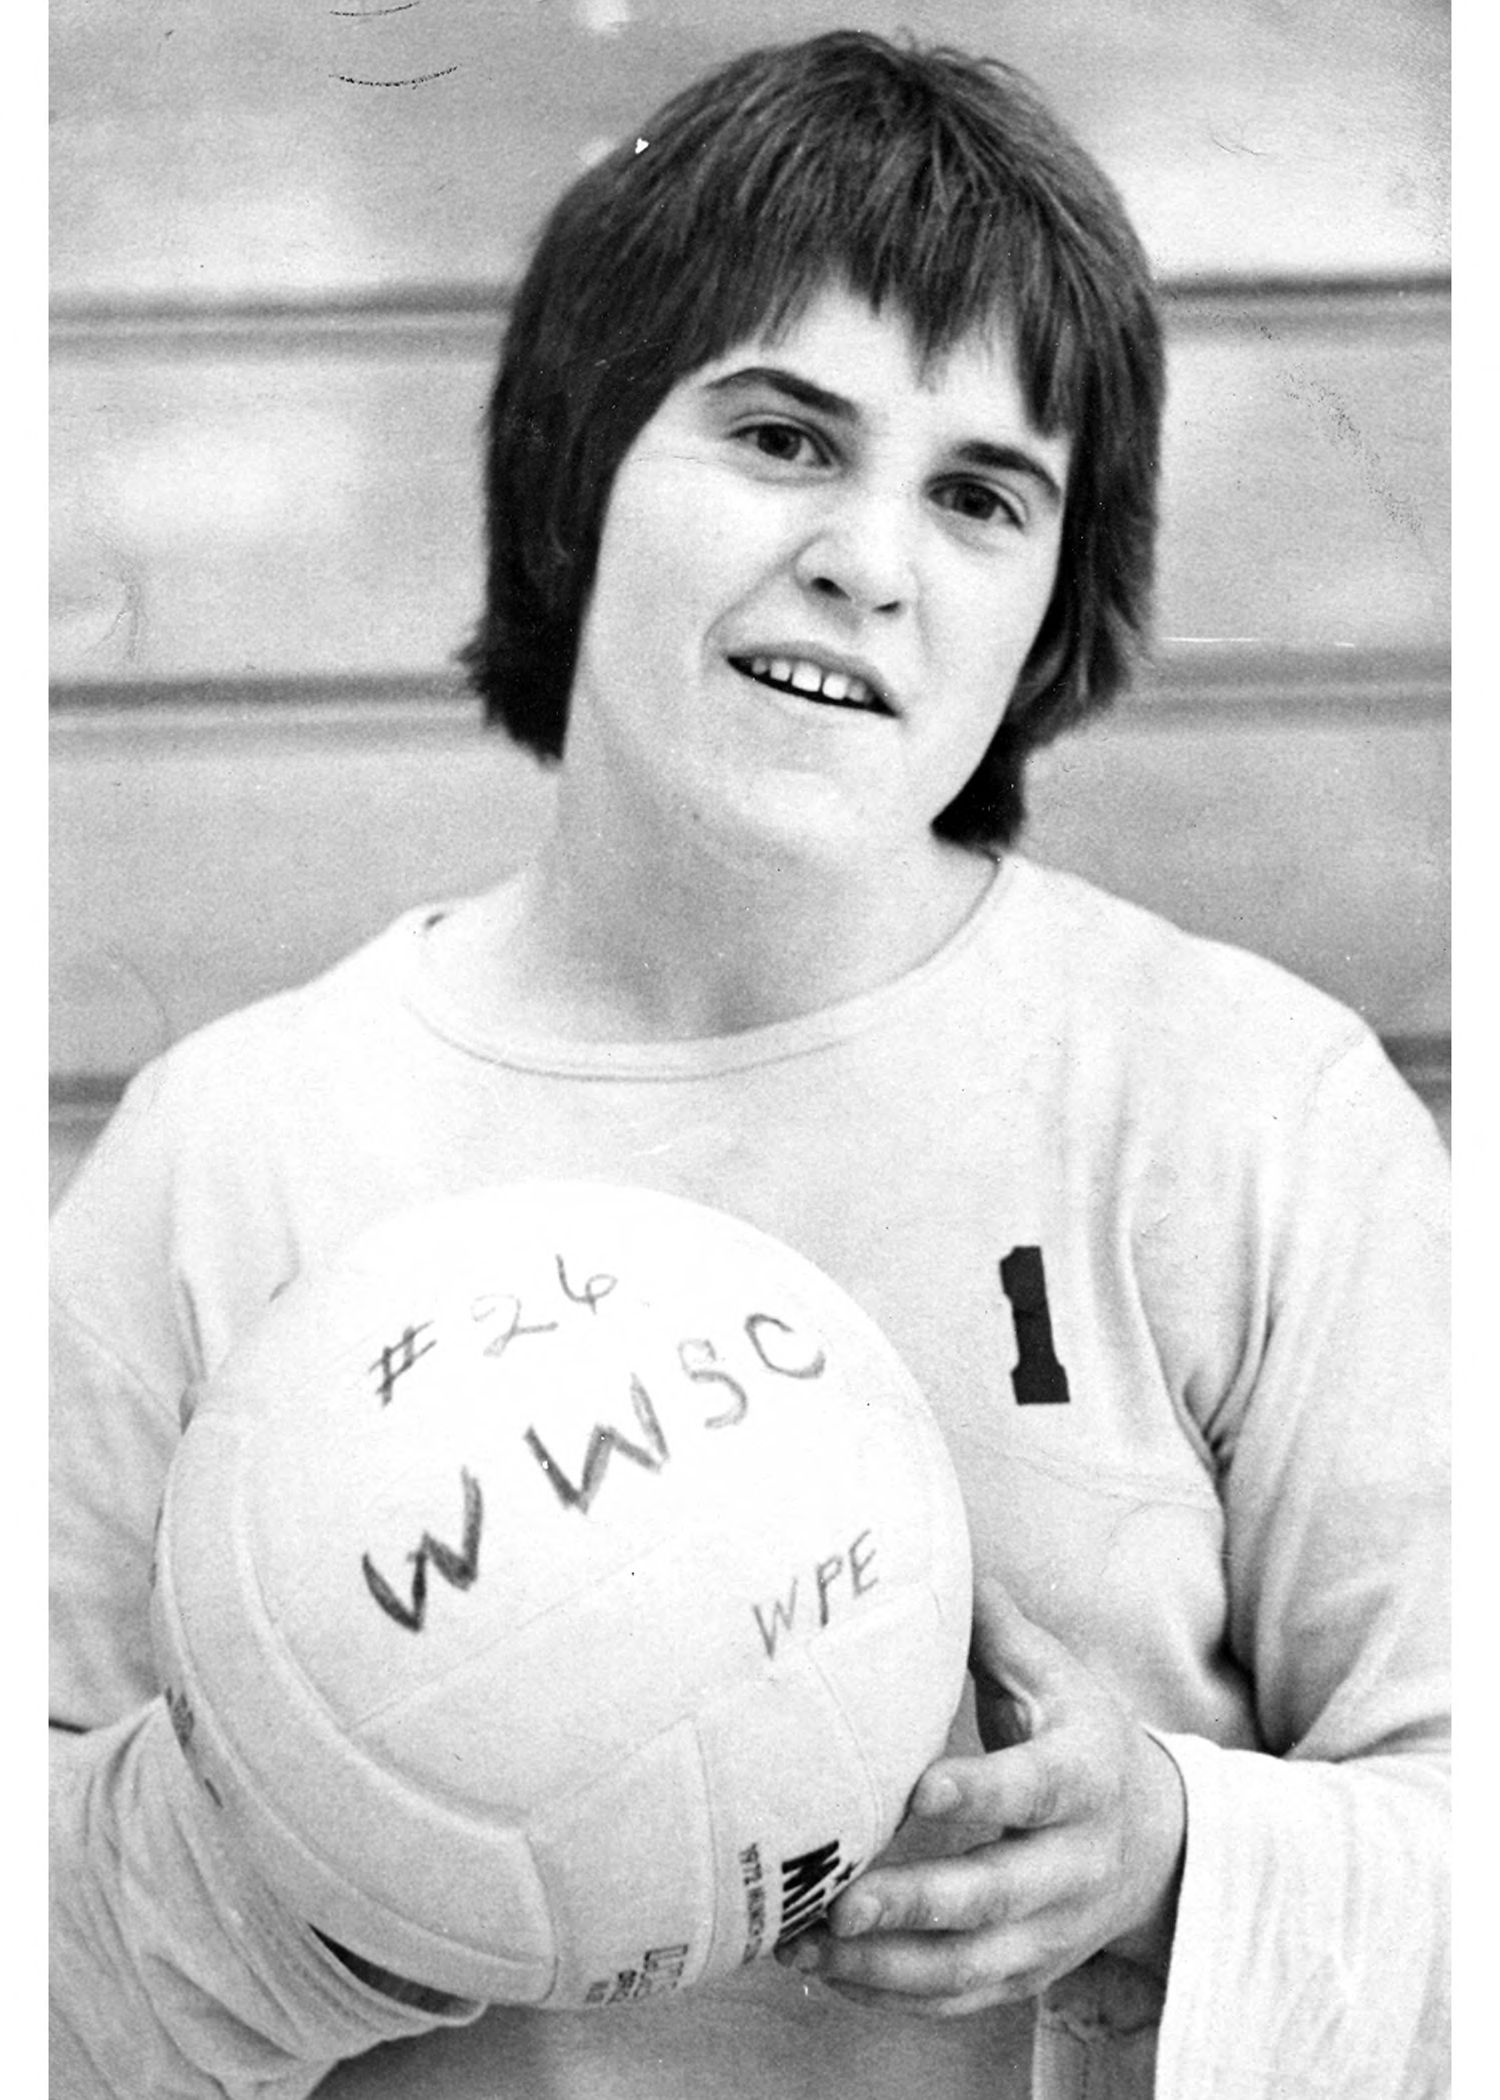 Terri McMahan in 1975 holds a volleyball